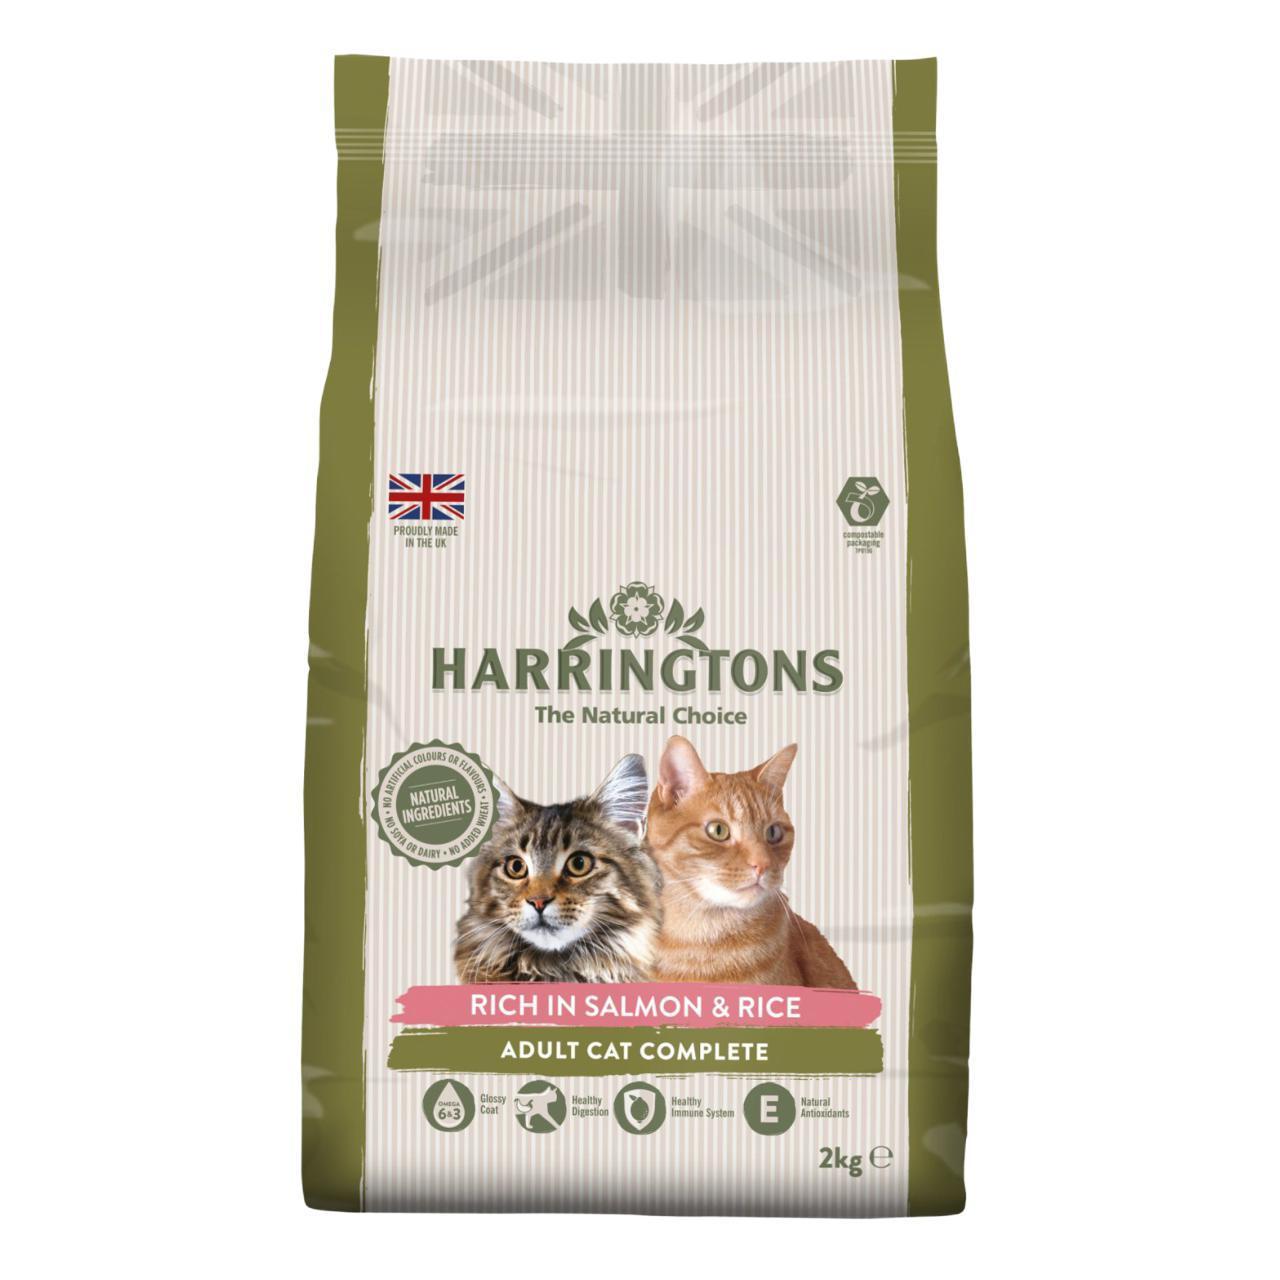 An image of Harringtons Cat Complete Salmon & Rice